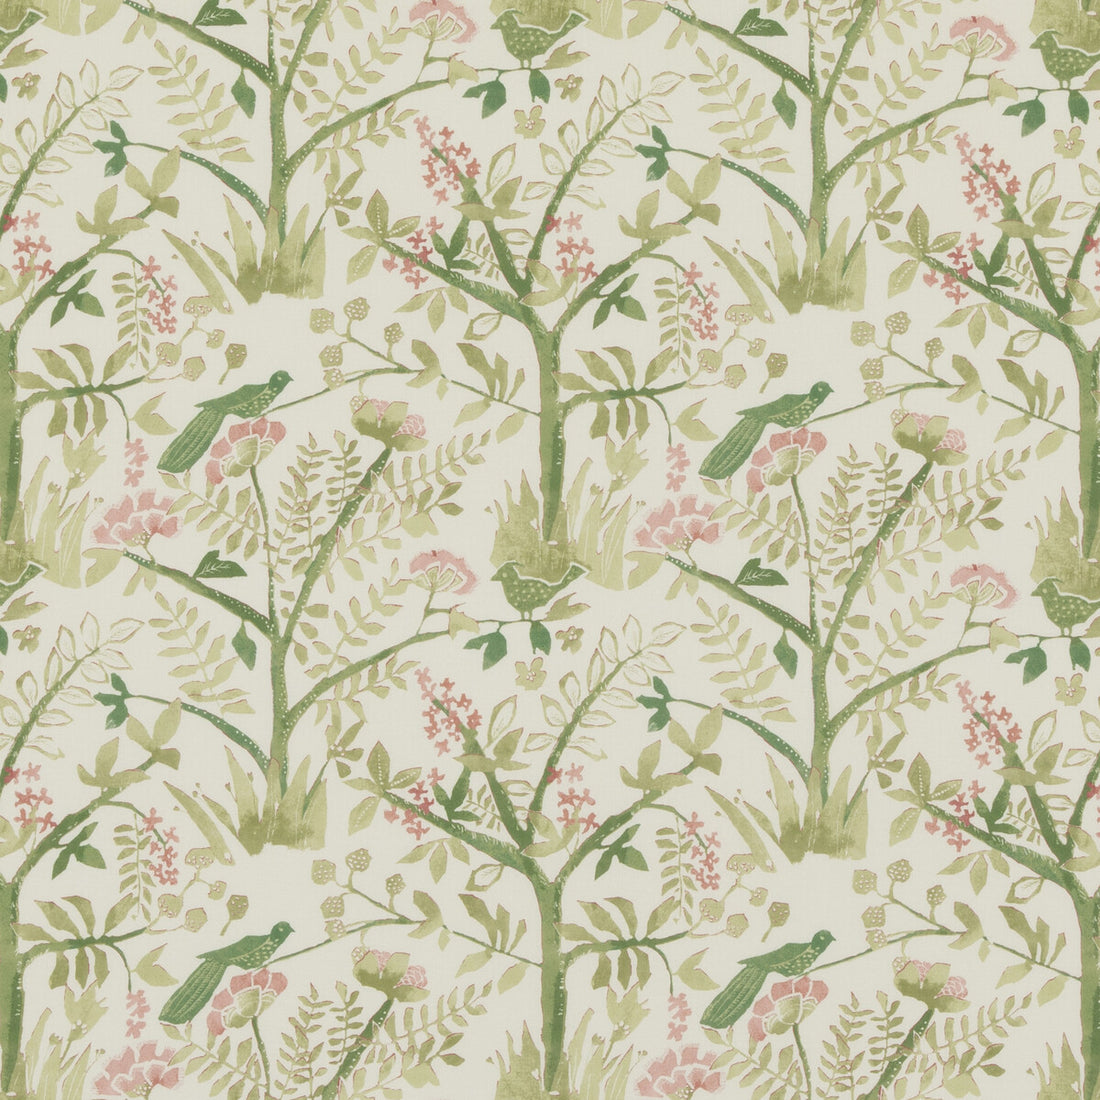 Lulworth fabric in green/pink color - pattern PP50502.3.0 - by Baker Lifestyle in the Bridport collection